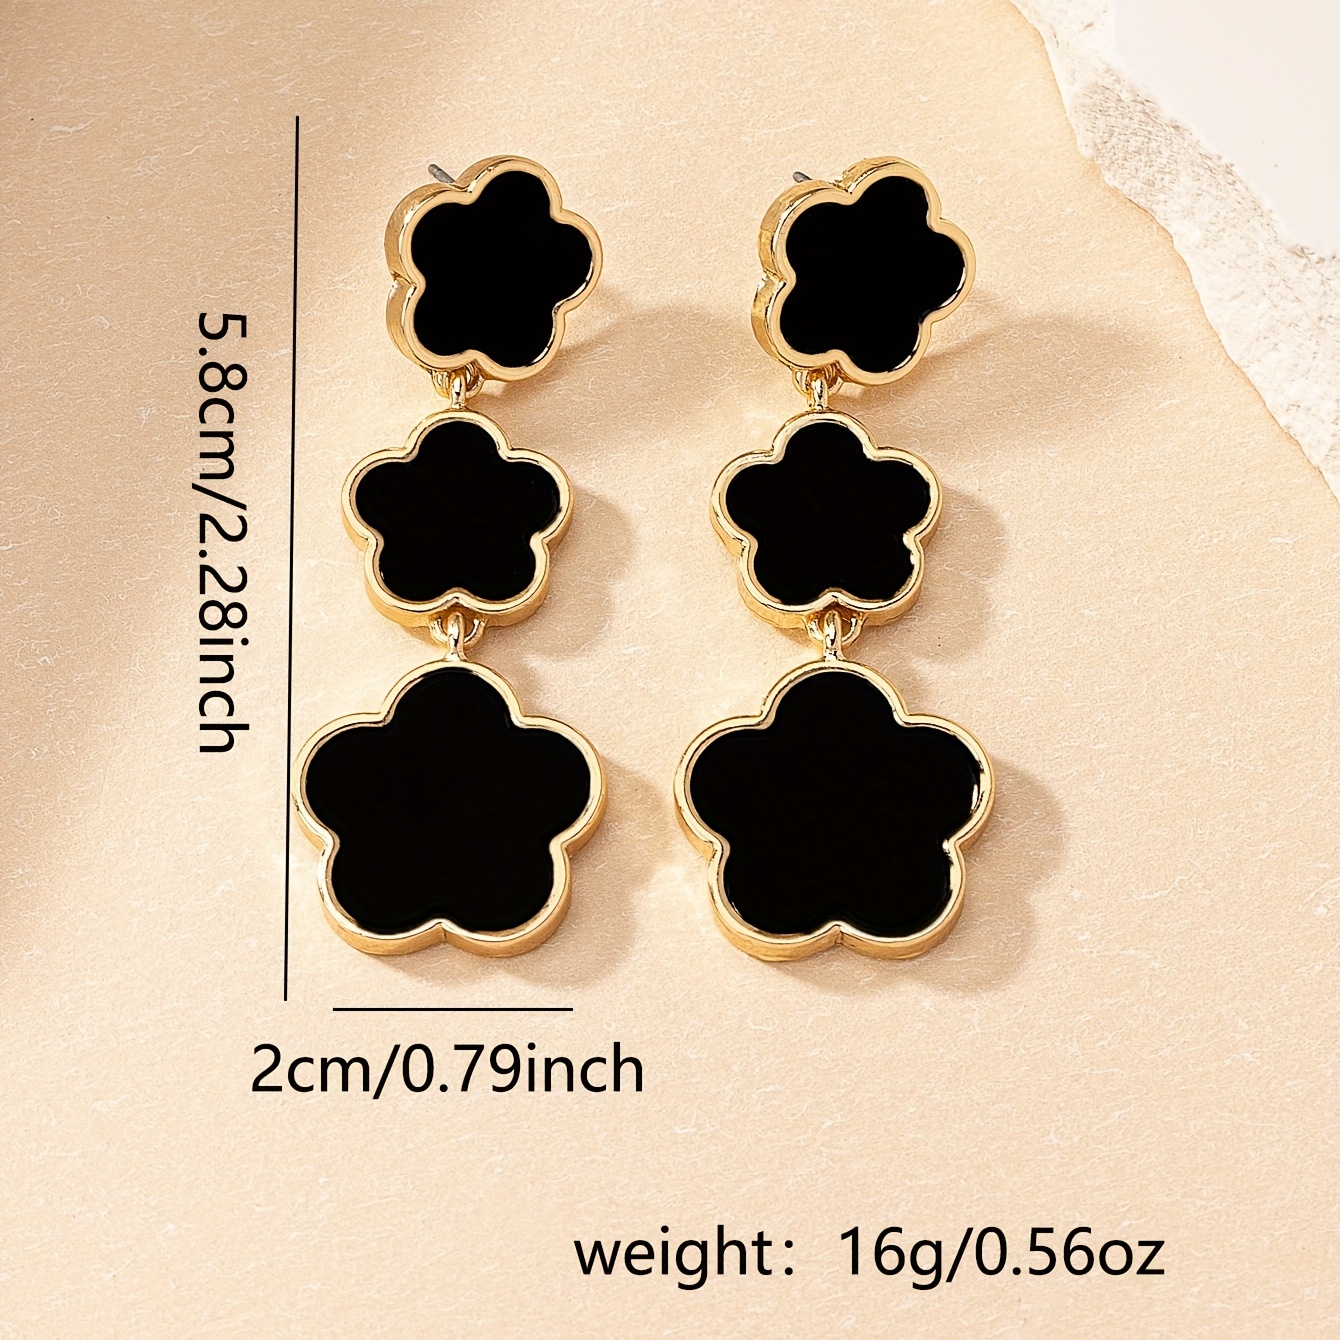 LV earring gold plated black & gold